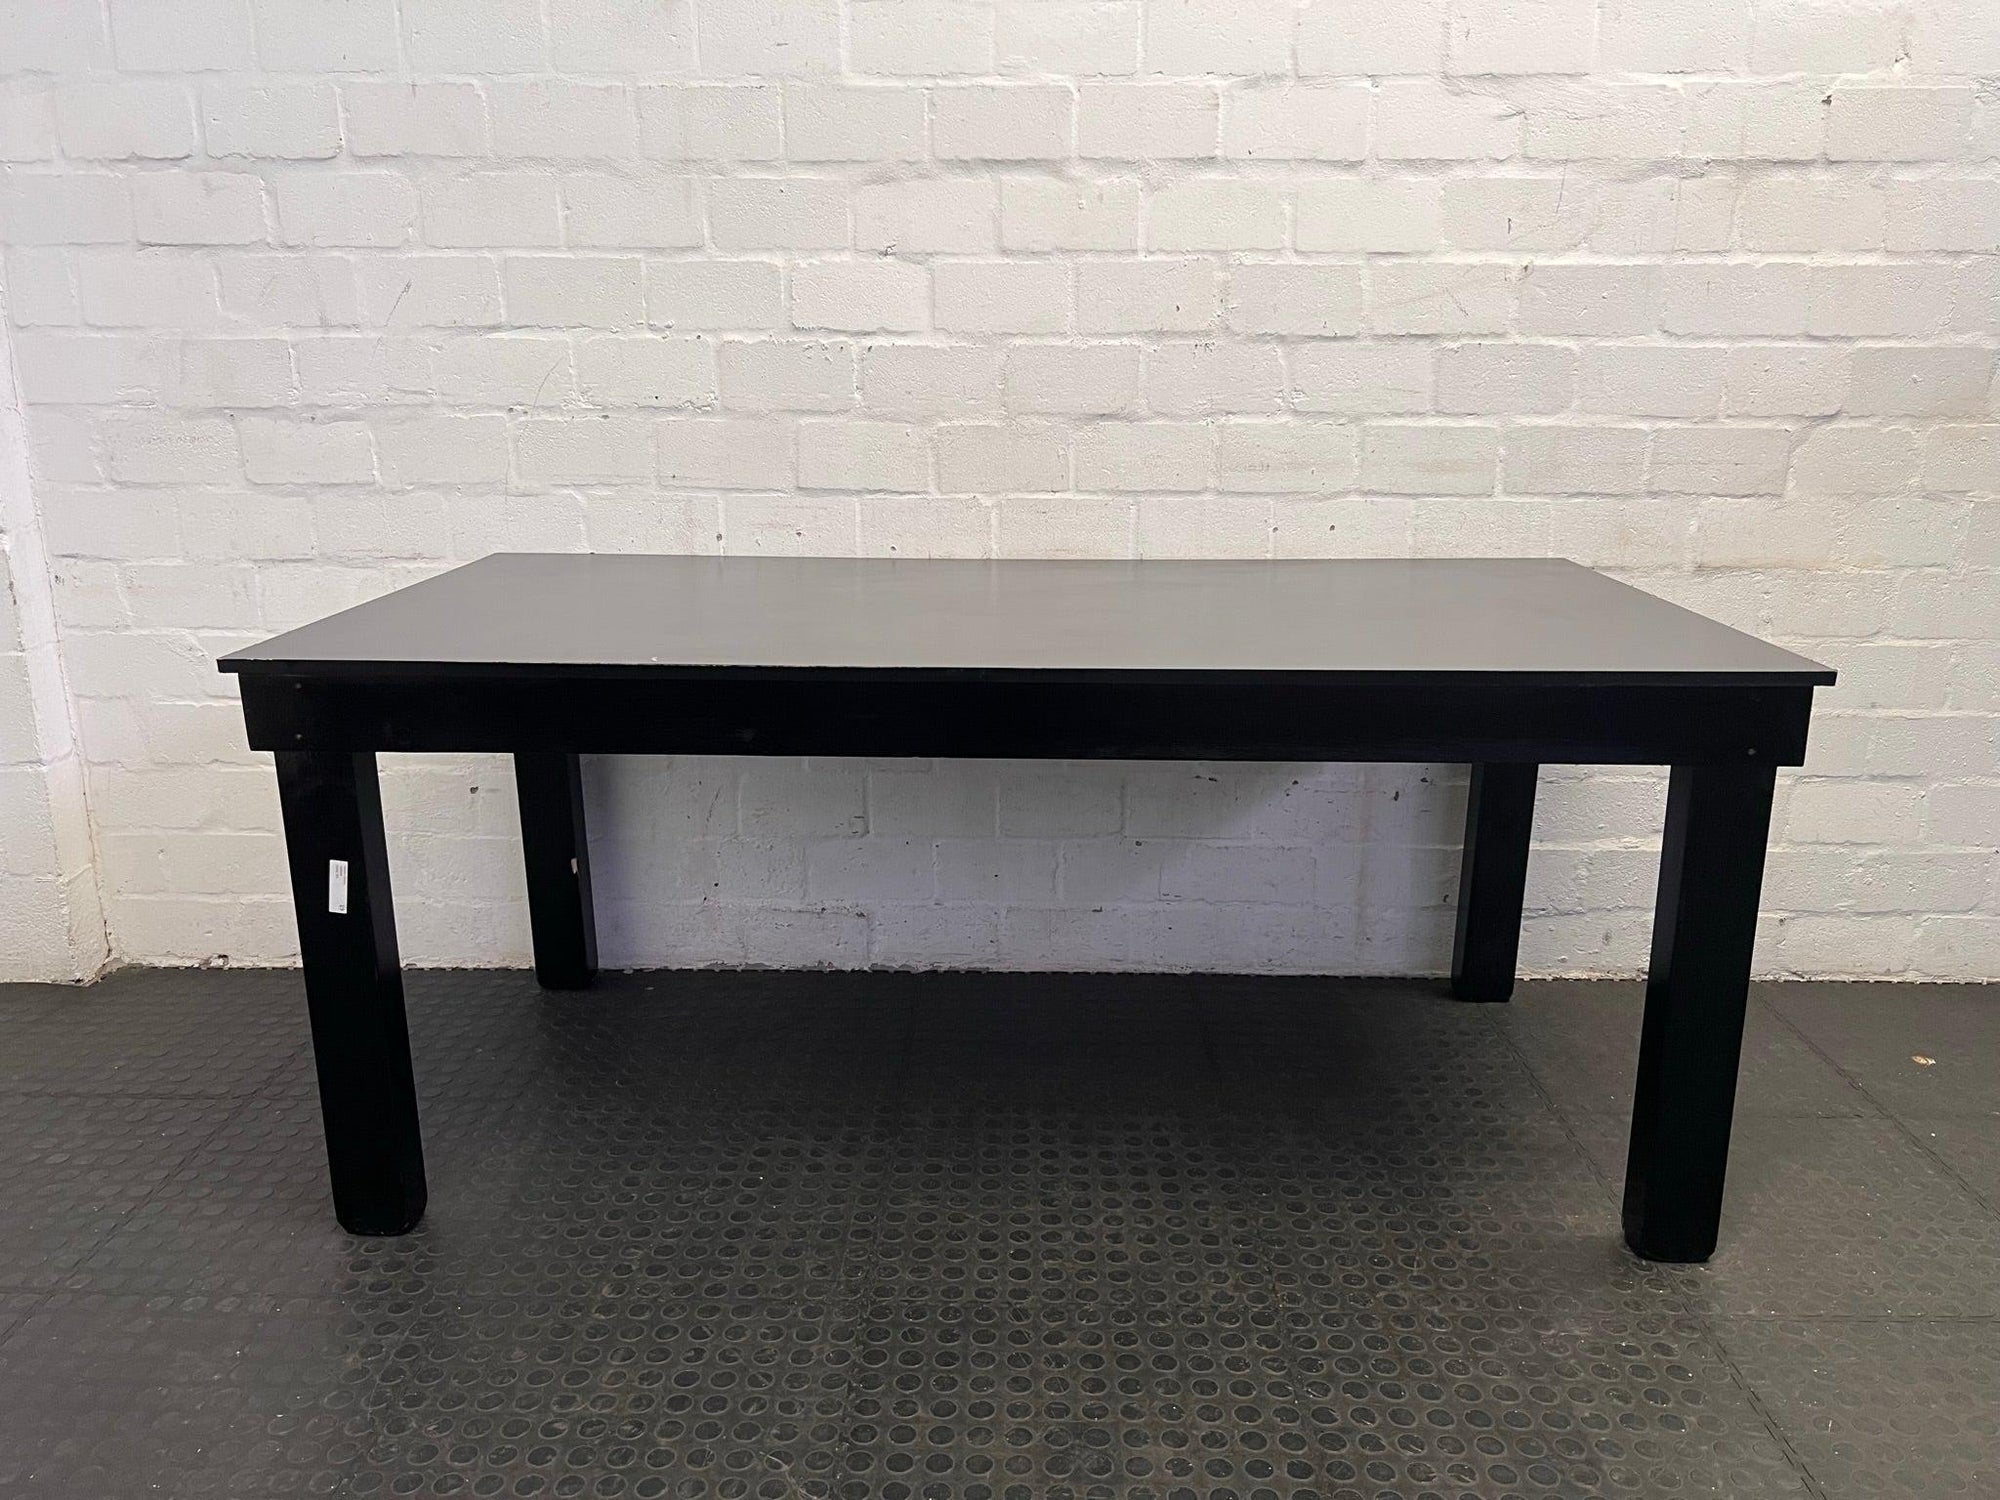 Wooden Black Laminate Dining Table (Some Chipping) - REDUCED